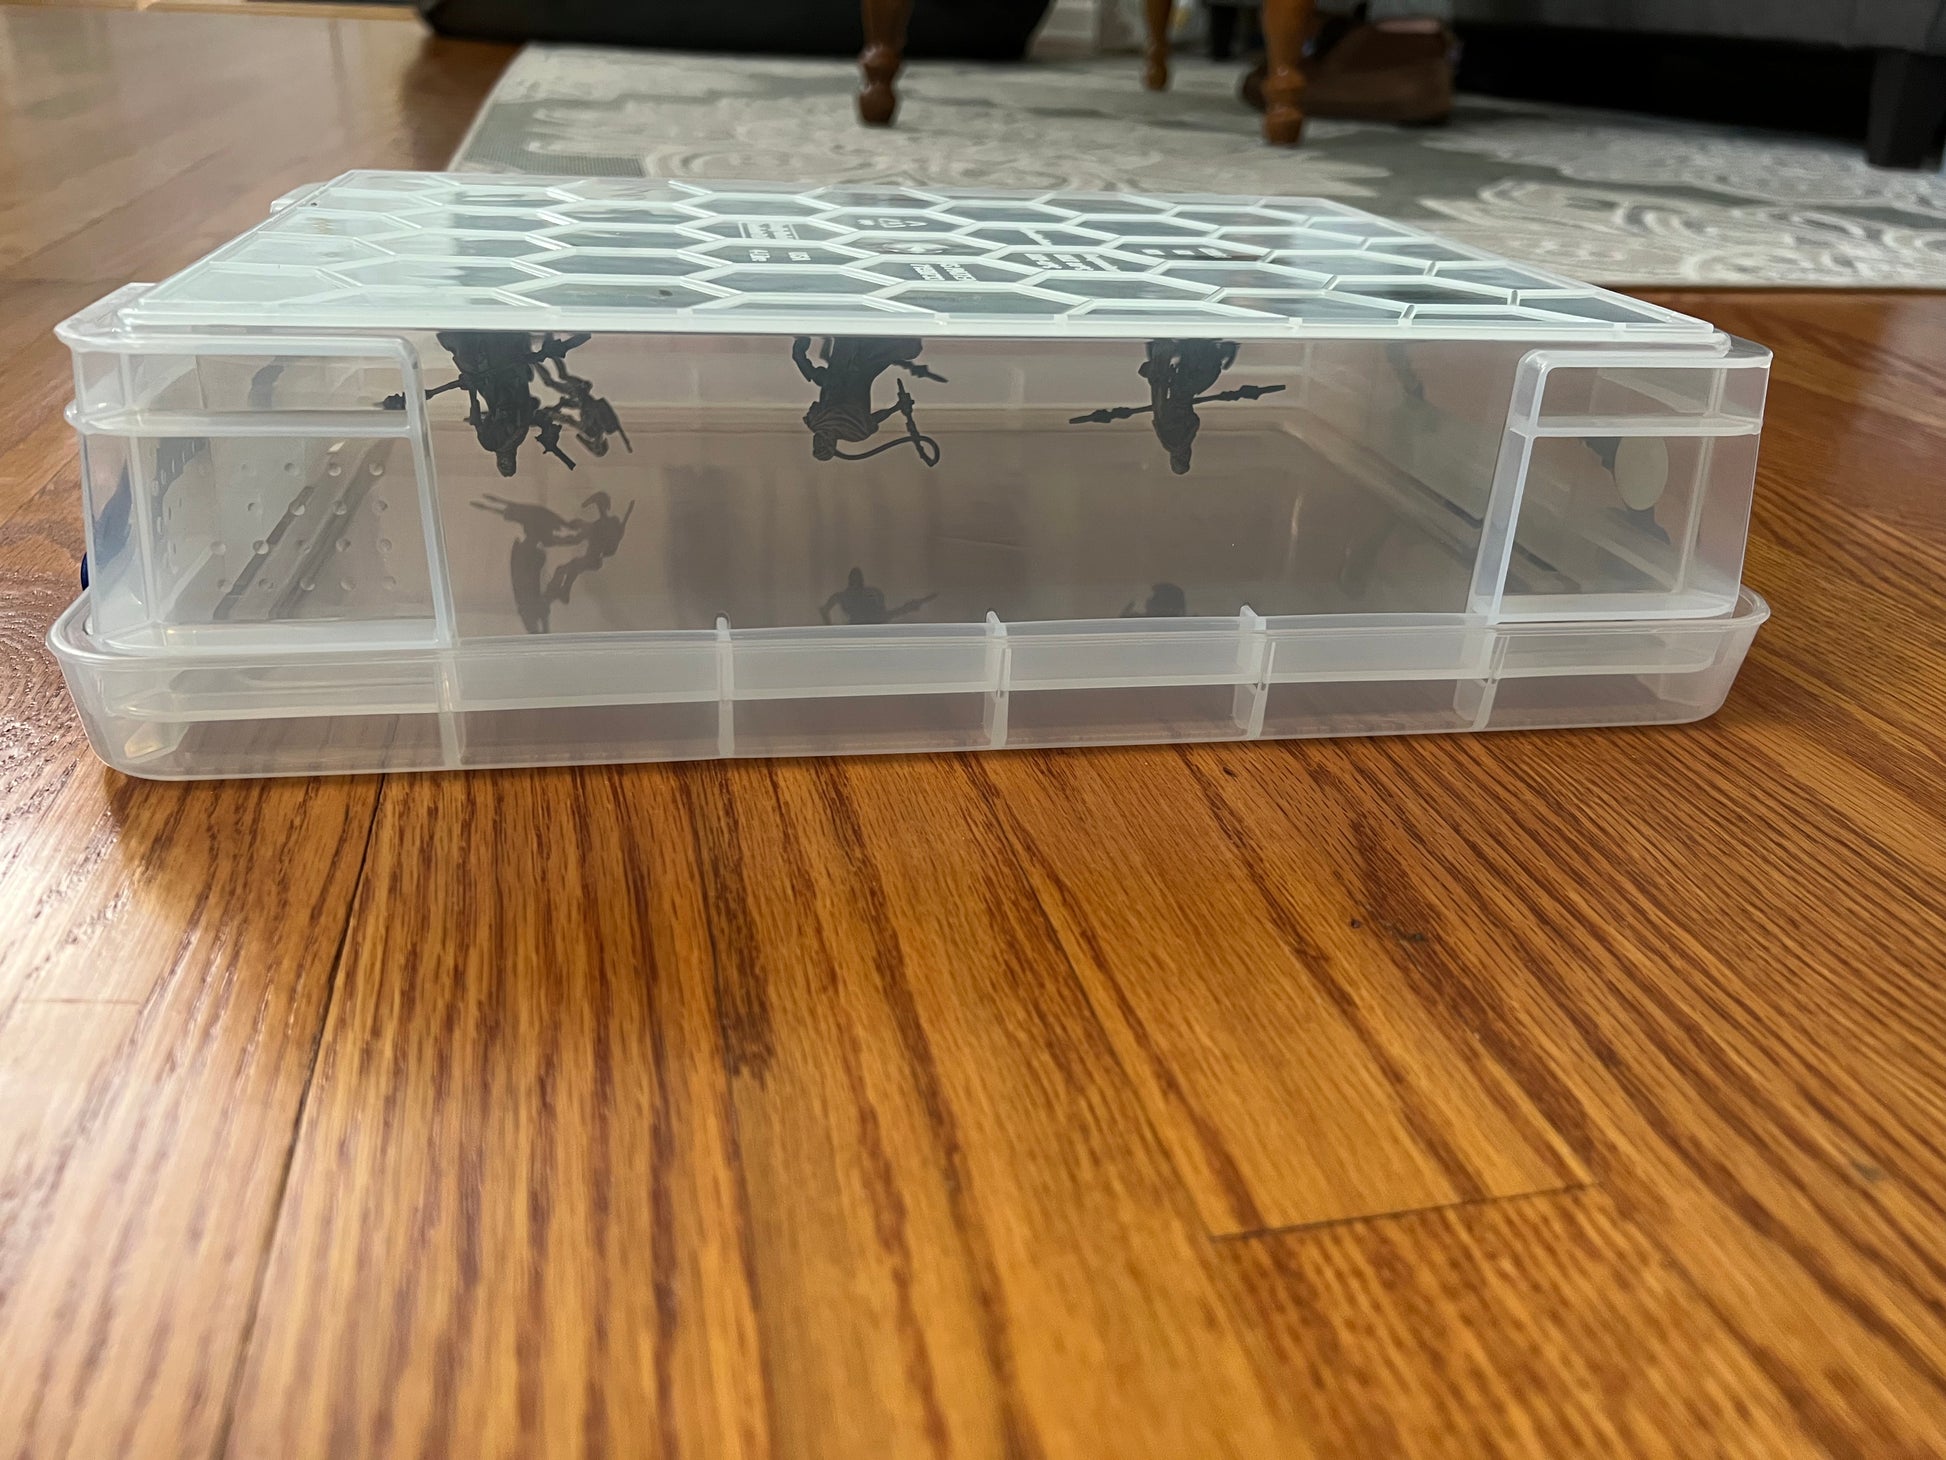 PSA: KR (KaiserRushforth) Multicase bags are the perfect fit for Really  Useful Boxes for those who use the magnetised bases and magnetic  sheet-glued-to-box method for miniature storage (more details in comment  section). 